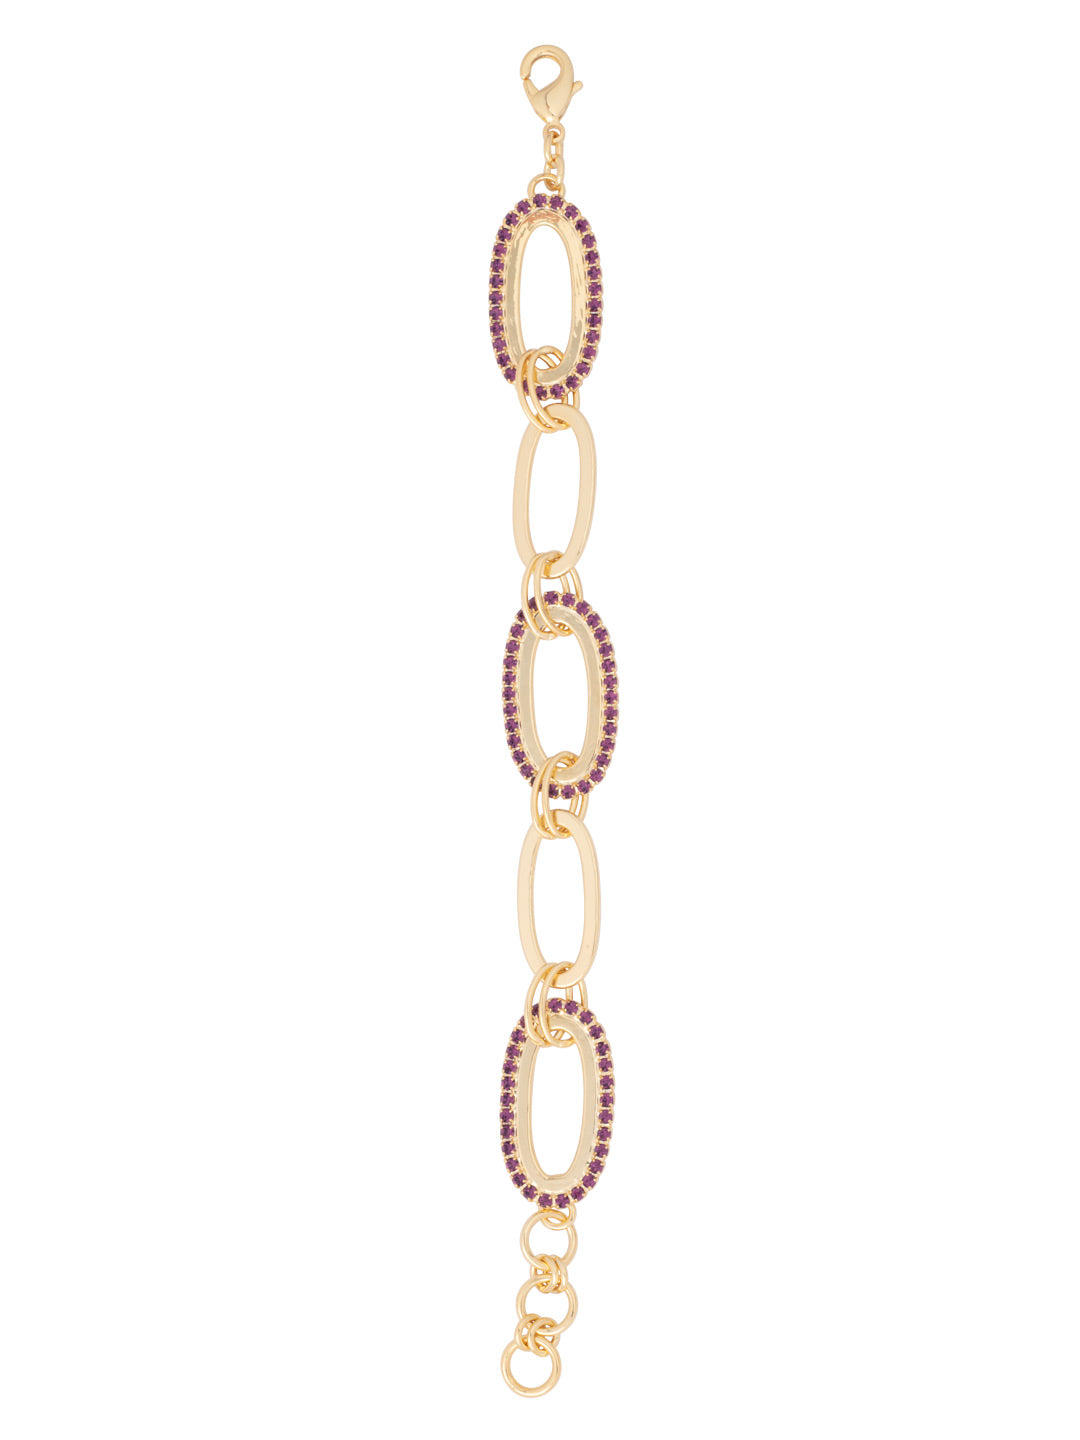 Tori Tennis Bracelet - BFL4BGMRL - <p>The Tori Tennis Bracelet features alternating rhinestone and metal chain links on an adjustable chain secured with a lobster claw clasp. From Sorrelli's Merlot collection in our Bright Gold-tone finish.</p>